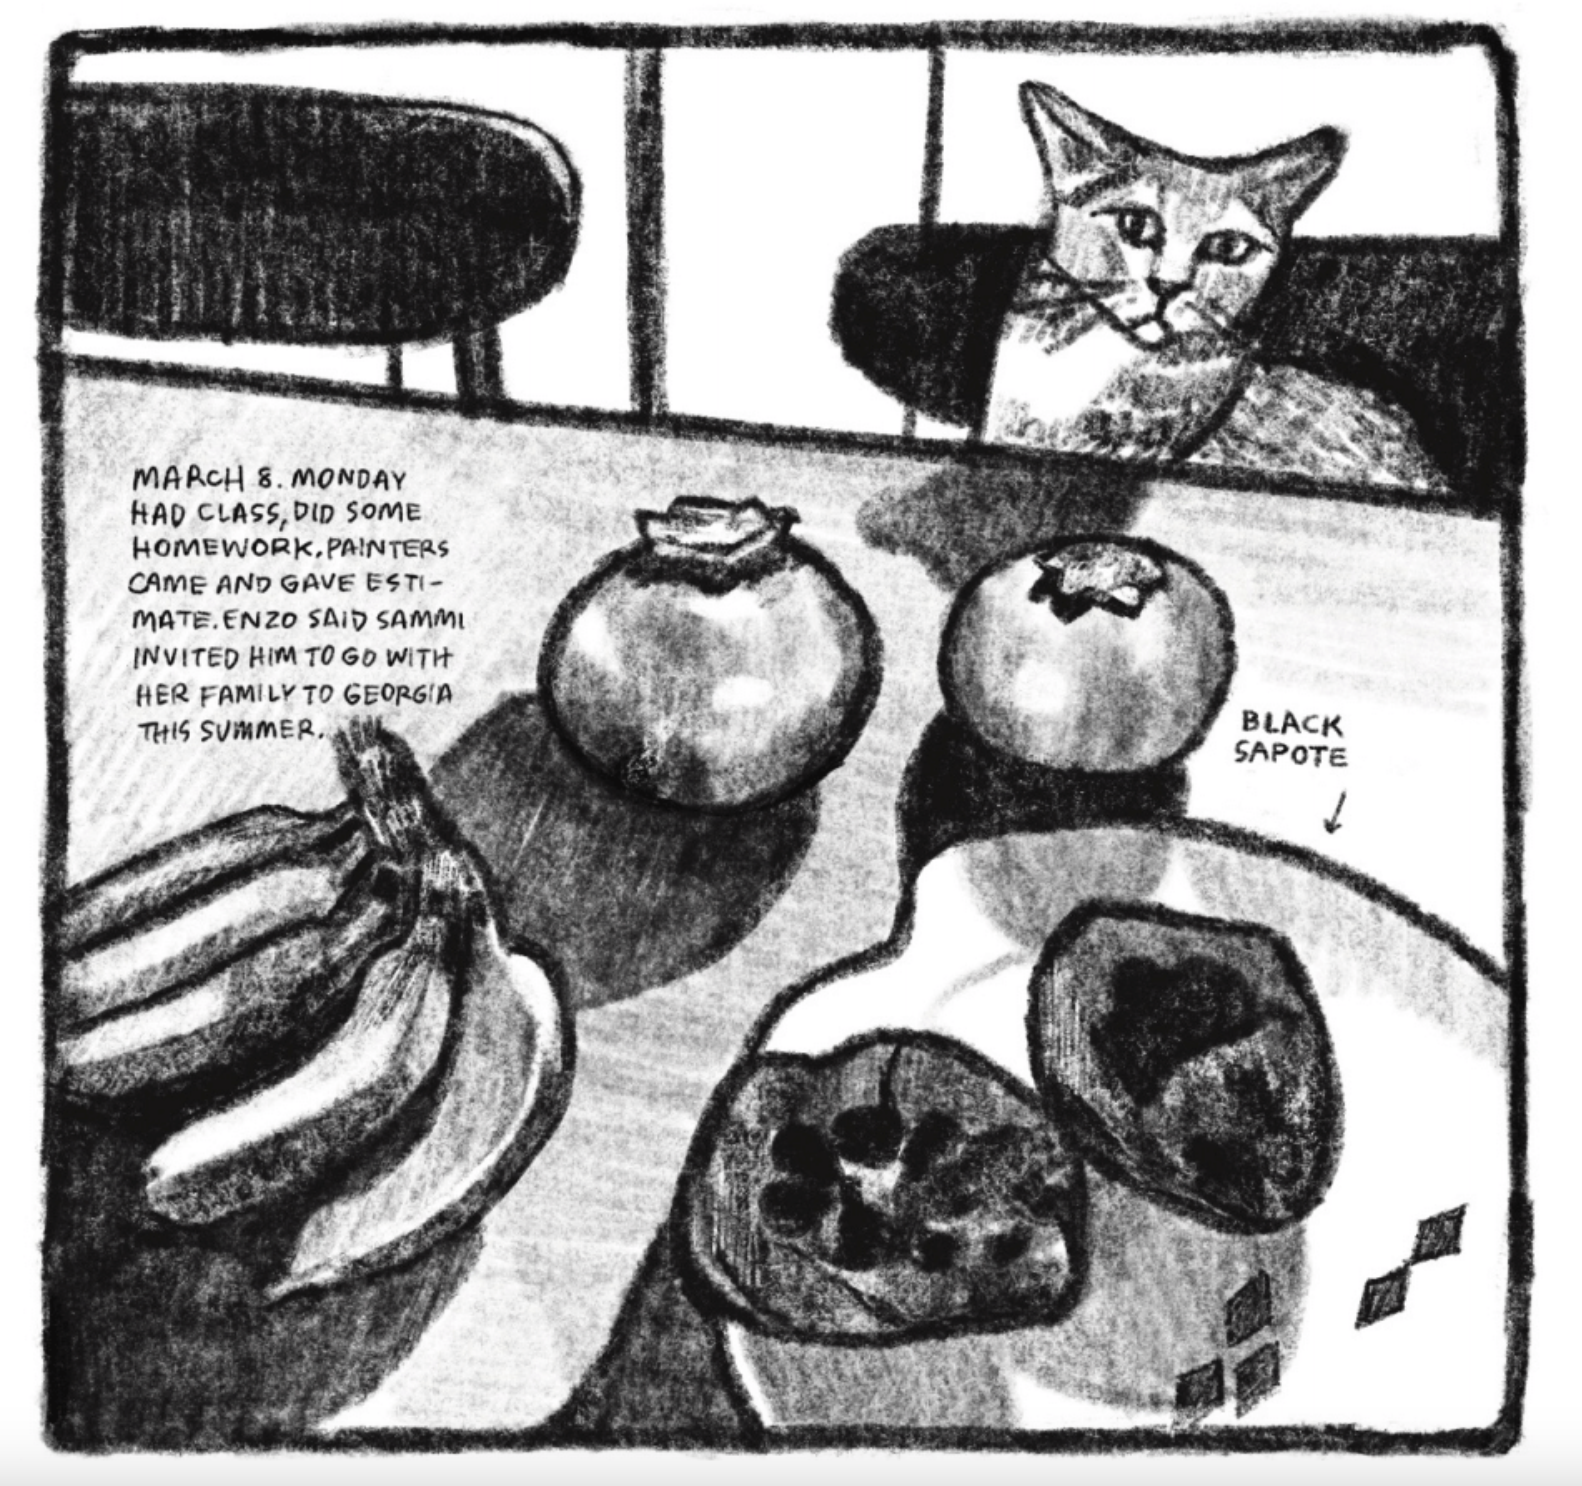 A cat sits upright in a chair at a kitchen table, looking suspiciously at its contents: two pomegranates, a bunch of bananas, and a halved black sapote (explicitly labeled with an arrow).
Description reads: "MARCH 8. MONDAY
HAD CLASS, DID SOME HOMEWORK. PAINTERS CAME AND GAVE ESTIMATE. ENZO SAID SAMMI INVITED HIM TO GO WITH HER FAMILY TO GEORGIA THIS SUMMER."